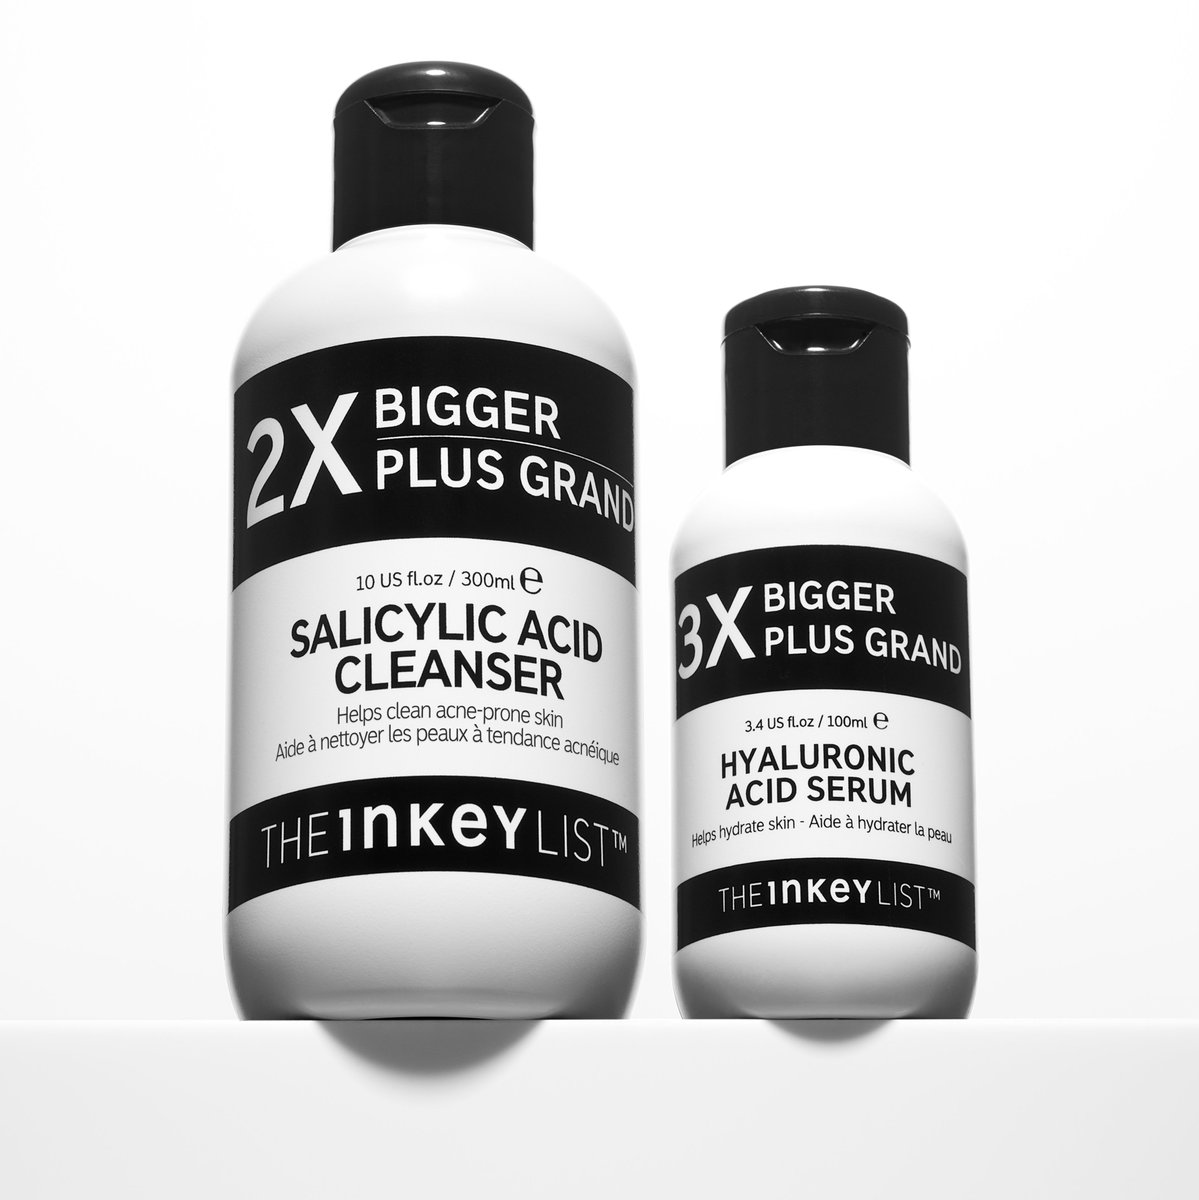 Our Supersize Hyaluronic Acid Serum is back, and with a friend🫶 Meet our NEW Supersize Salicylic Acid Cleanser! Both with a 25% saving, you’ll want these breakout-fighting products in your routine🖤 Available globally🫧💧